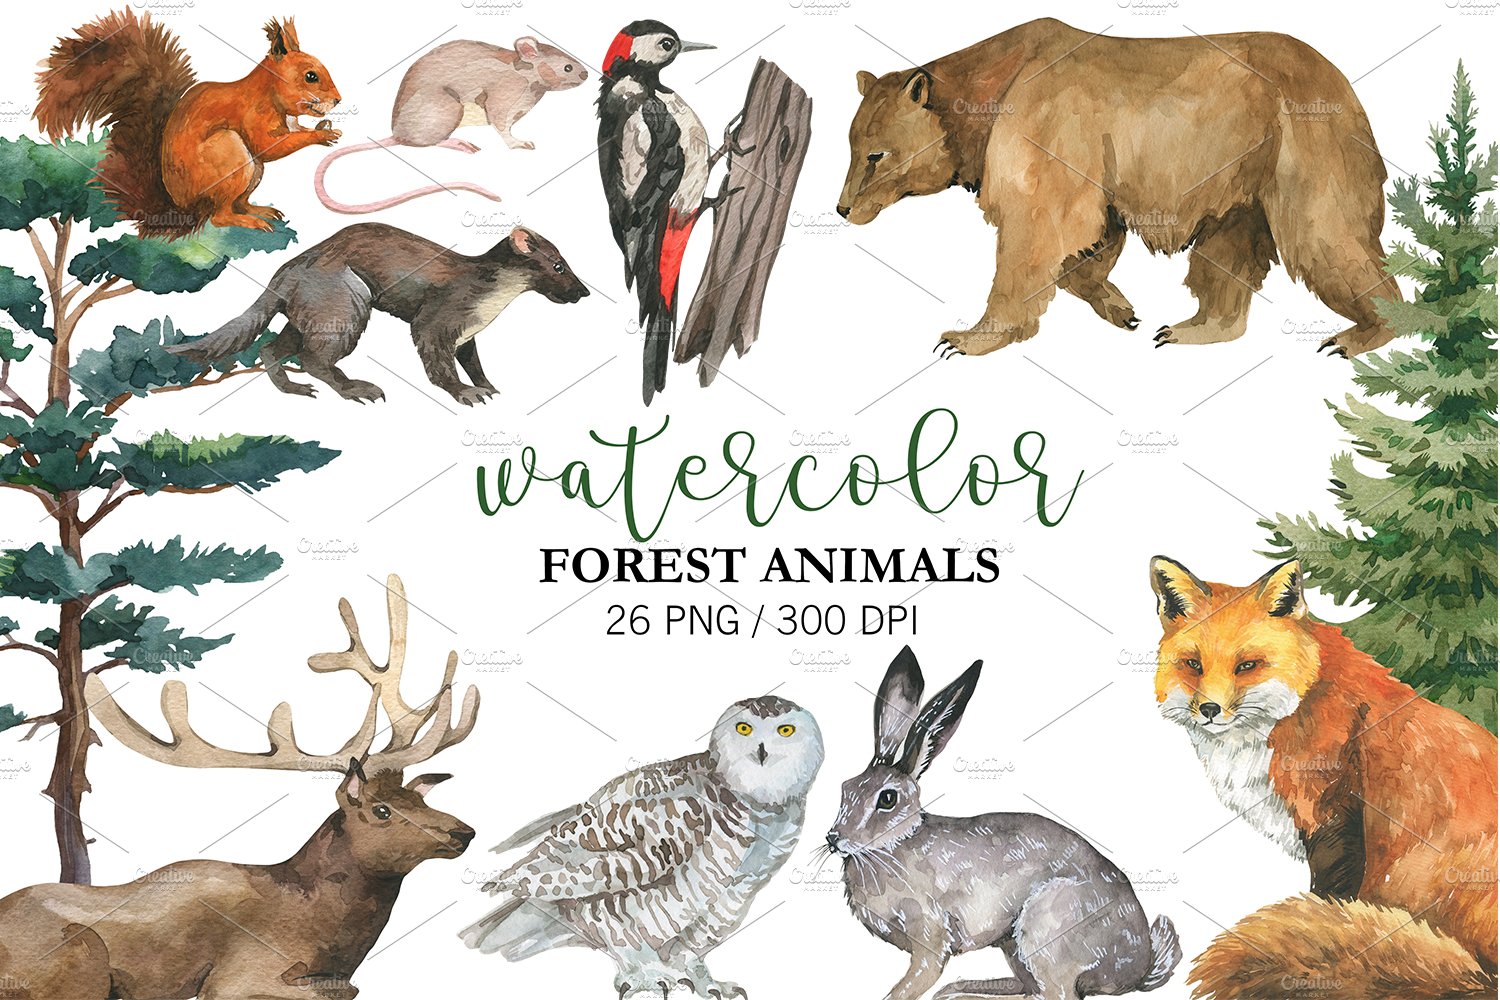 Watercolor Forest Animal Clipart PNG cover image.